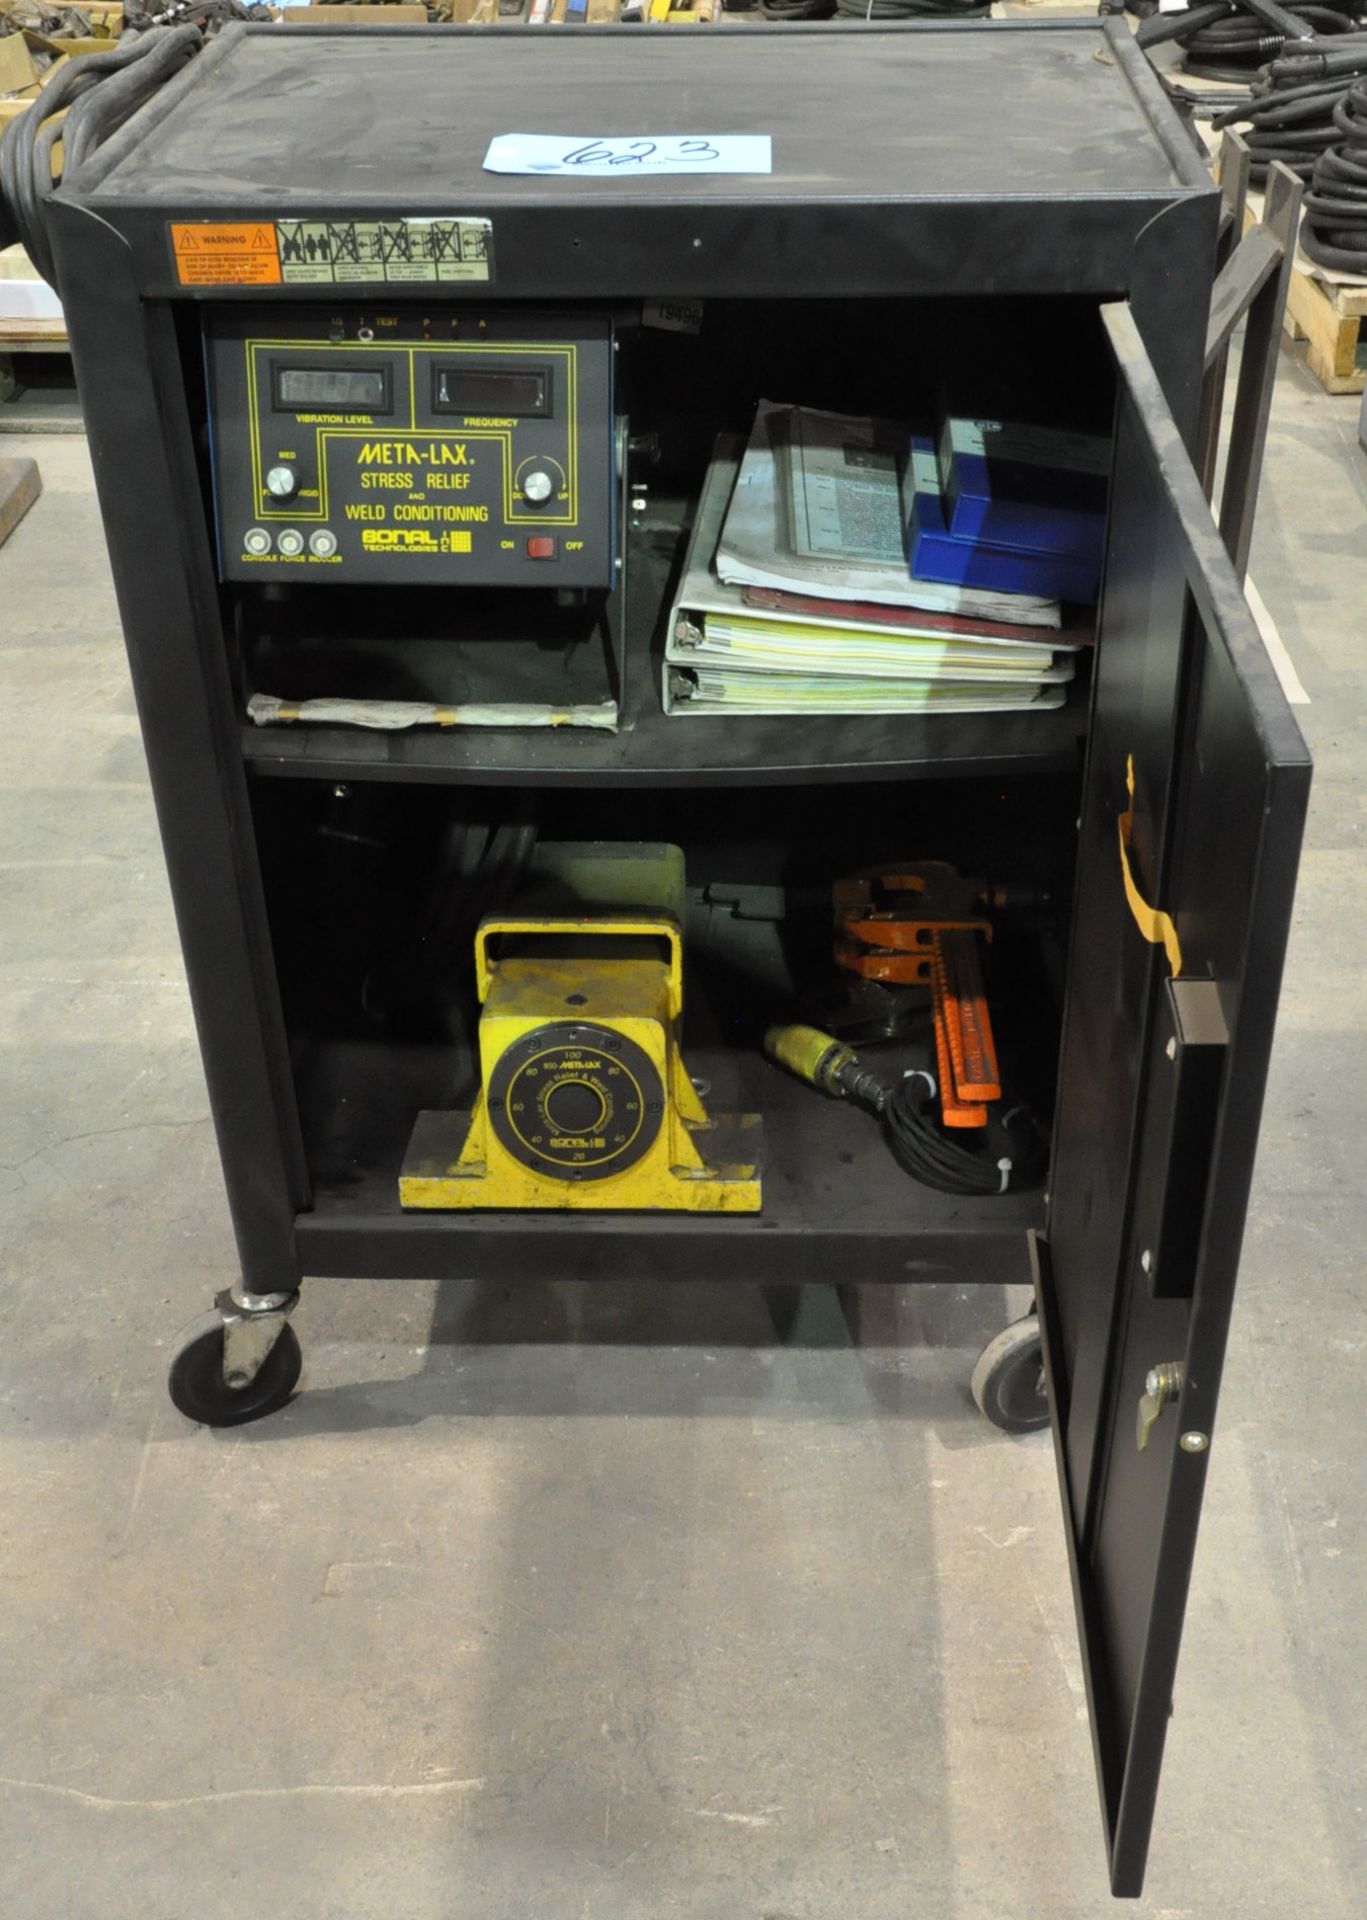 Bonal Technologies Meta-Lax Stress Relief and Weld Conditioning System with Portable Cabinet